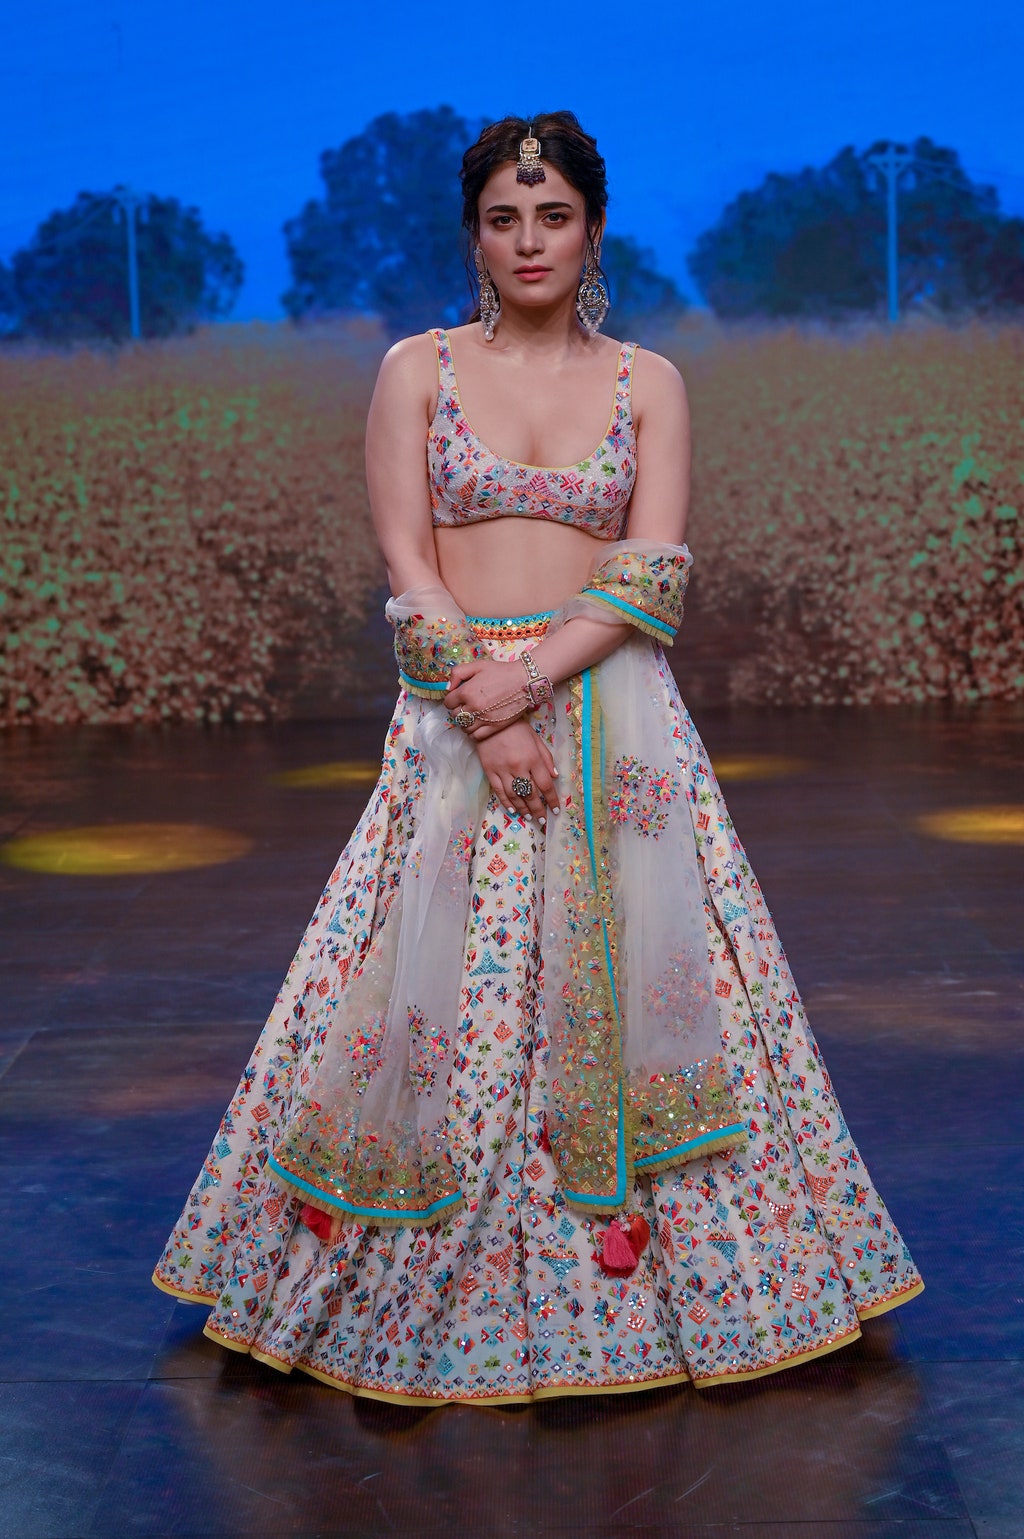 Pooja Hegde Appears Lovely And Elusive In A Glittery Varun Chakkilam Lehenga  At Lakme Fashion Week 2021 | IWMBuzz